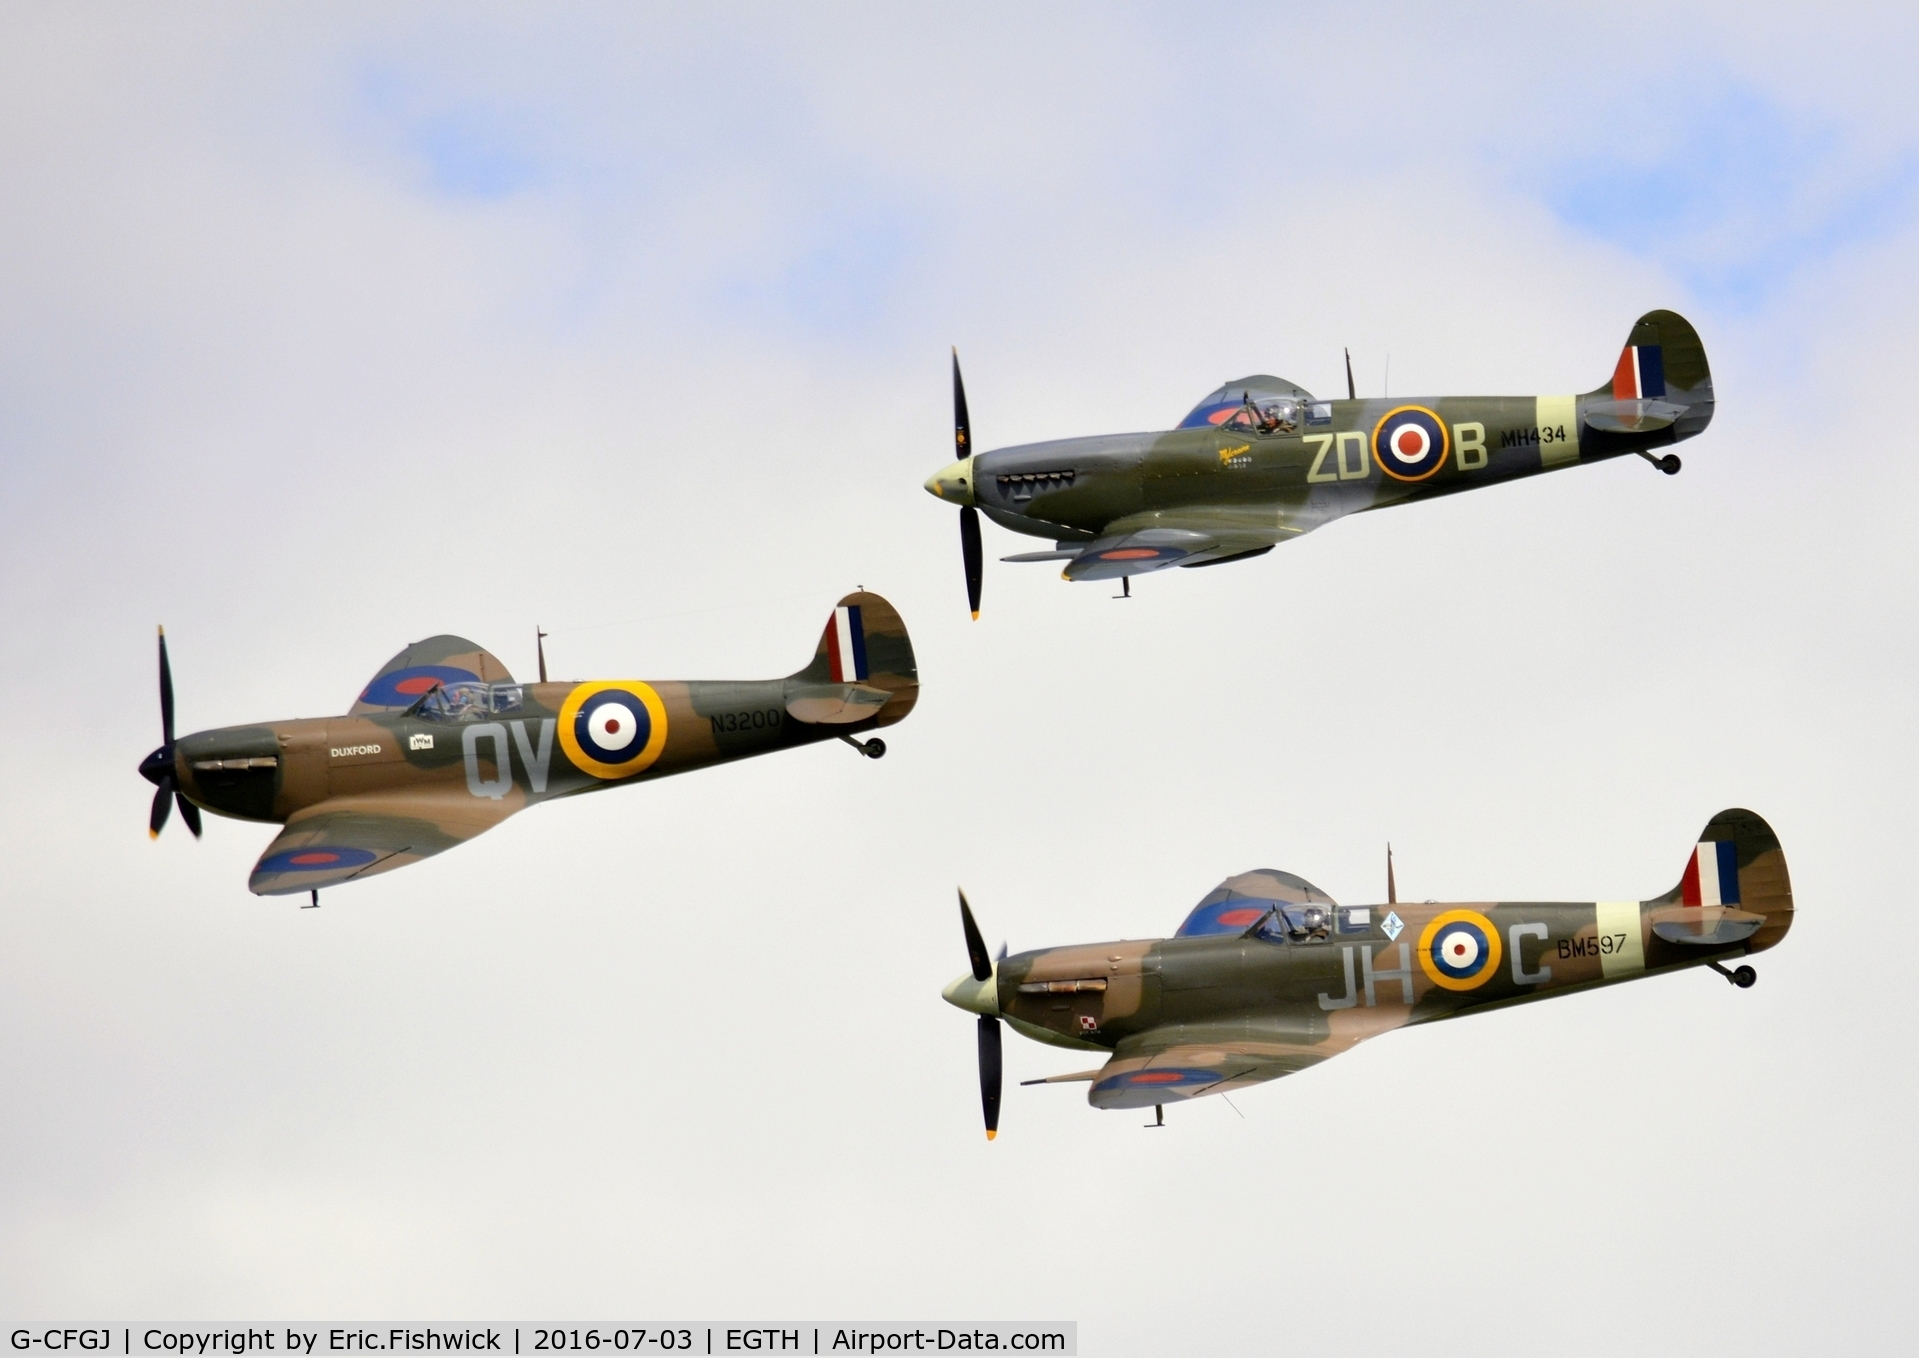 G-CFGJ, 1939 Supermarine Spitfire 1 C/N 441, 45 N3200, MH434 and BM597 in the skies over Old Warden.